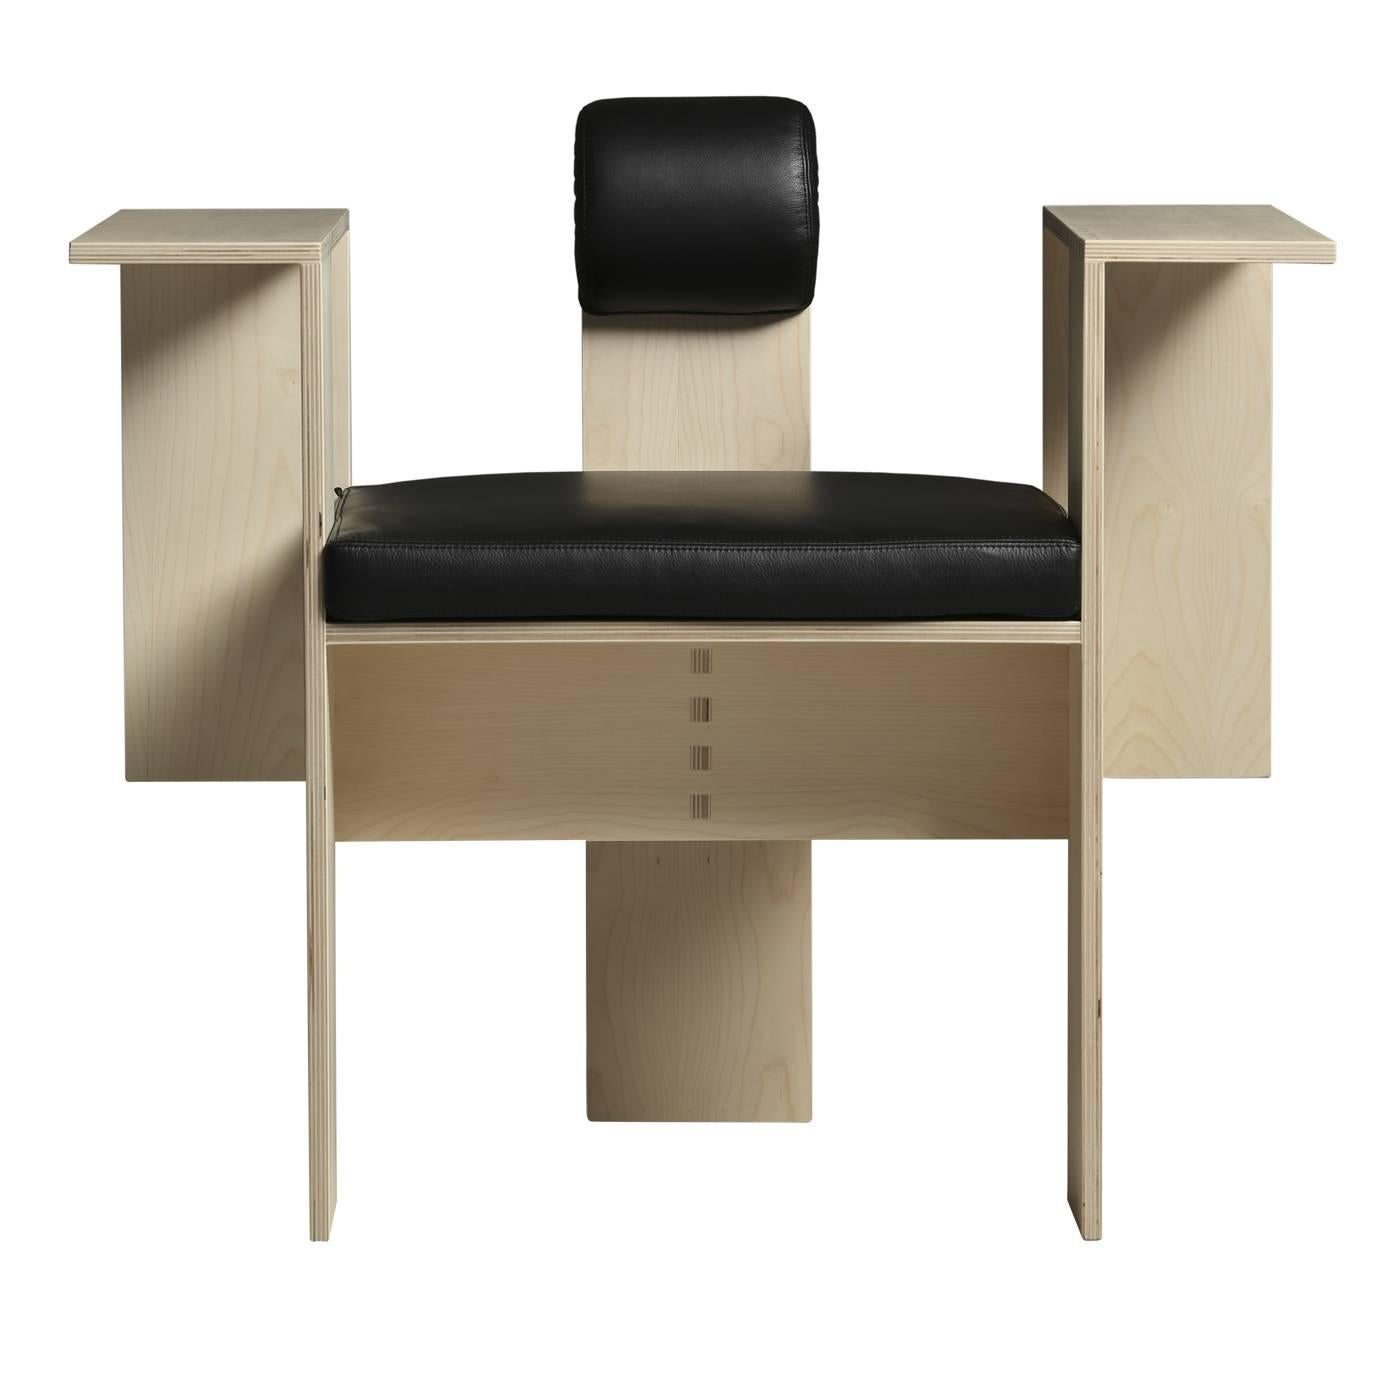 Designed by Mario Botta, this exquisite chair is a functional sculpture and will make an arresting effect in any room it is placed. The geometric shapes that make its contemporary silhouette are crafted in pieces assembled with joints in birch